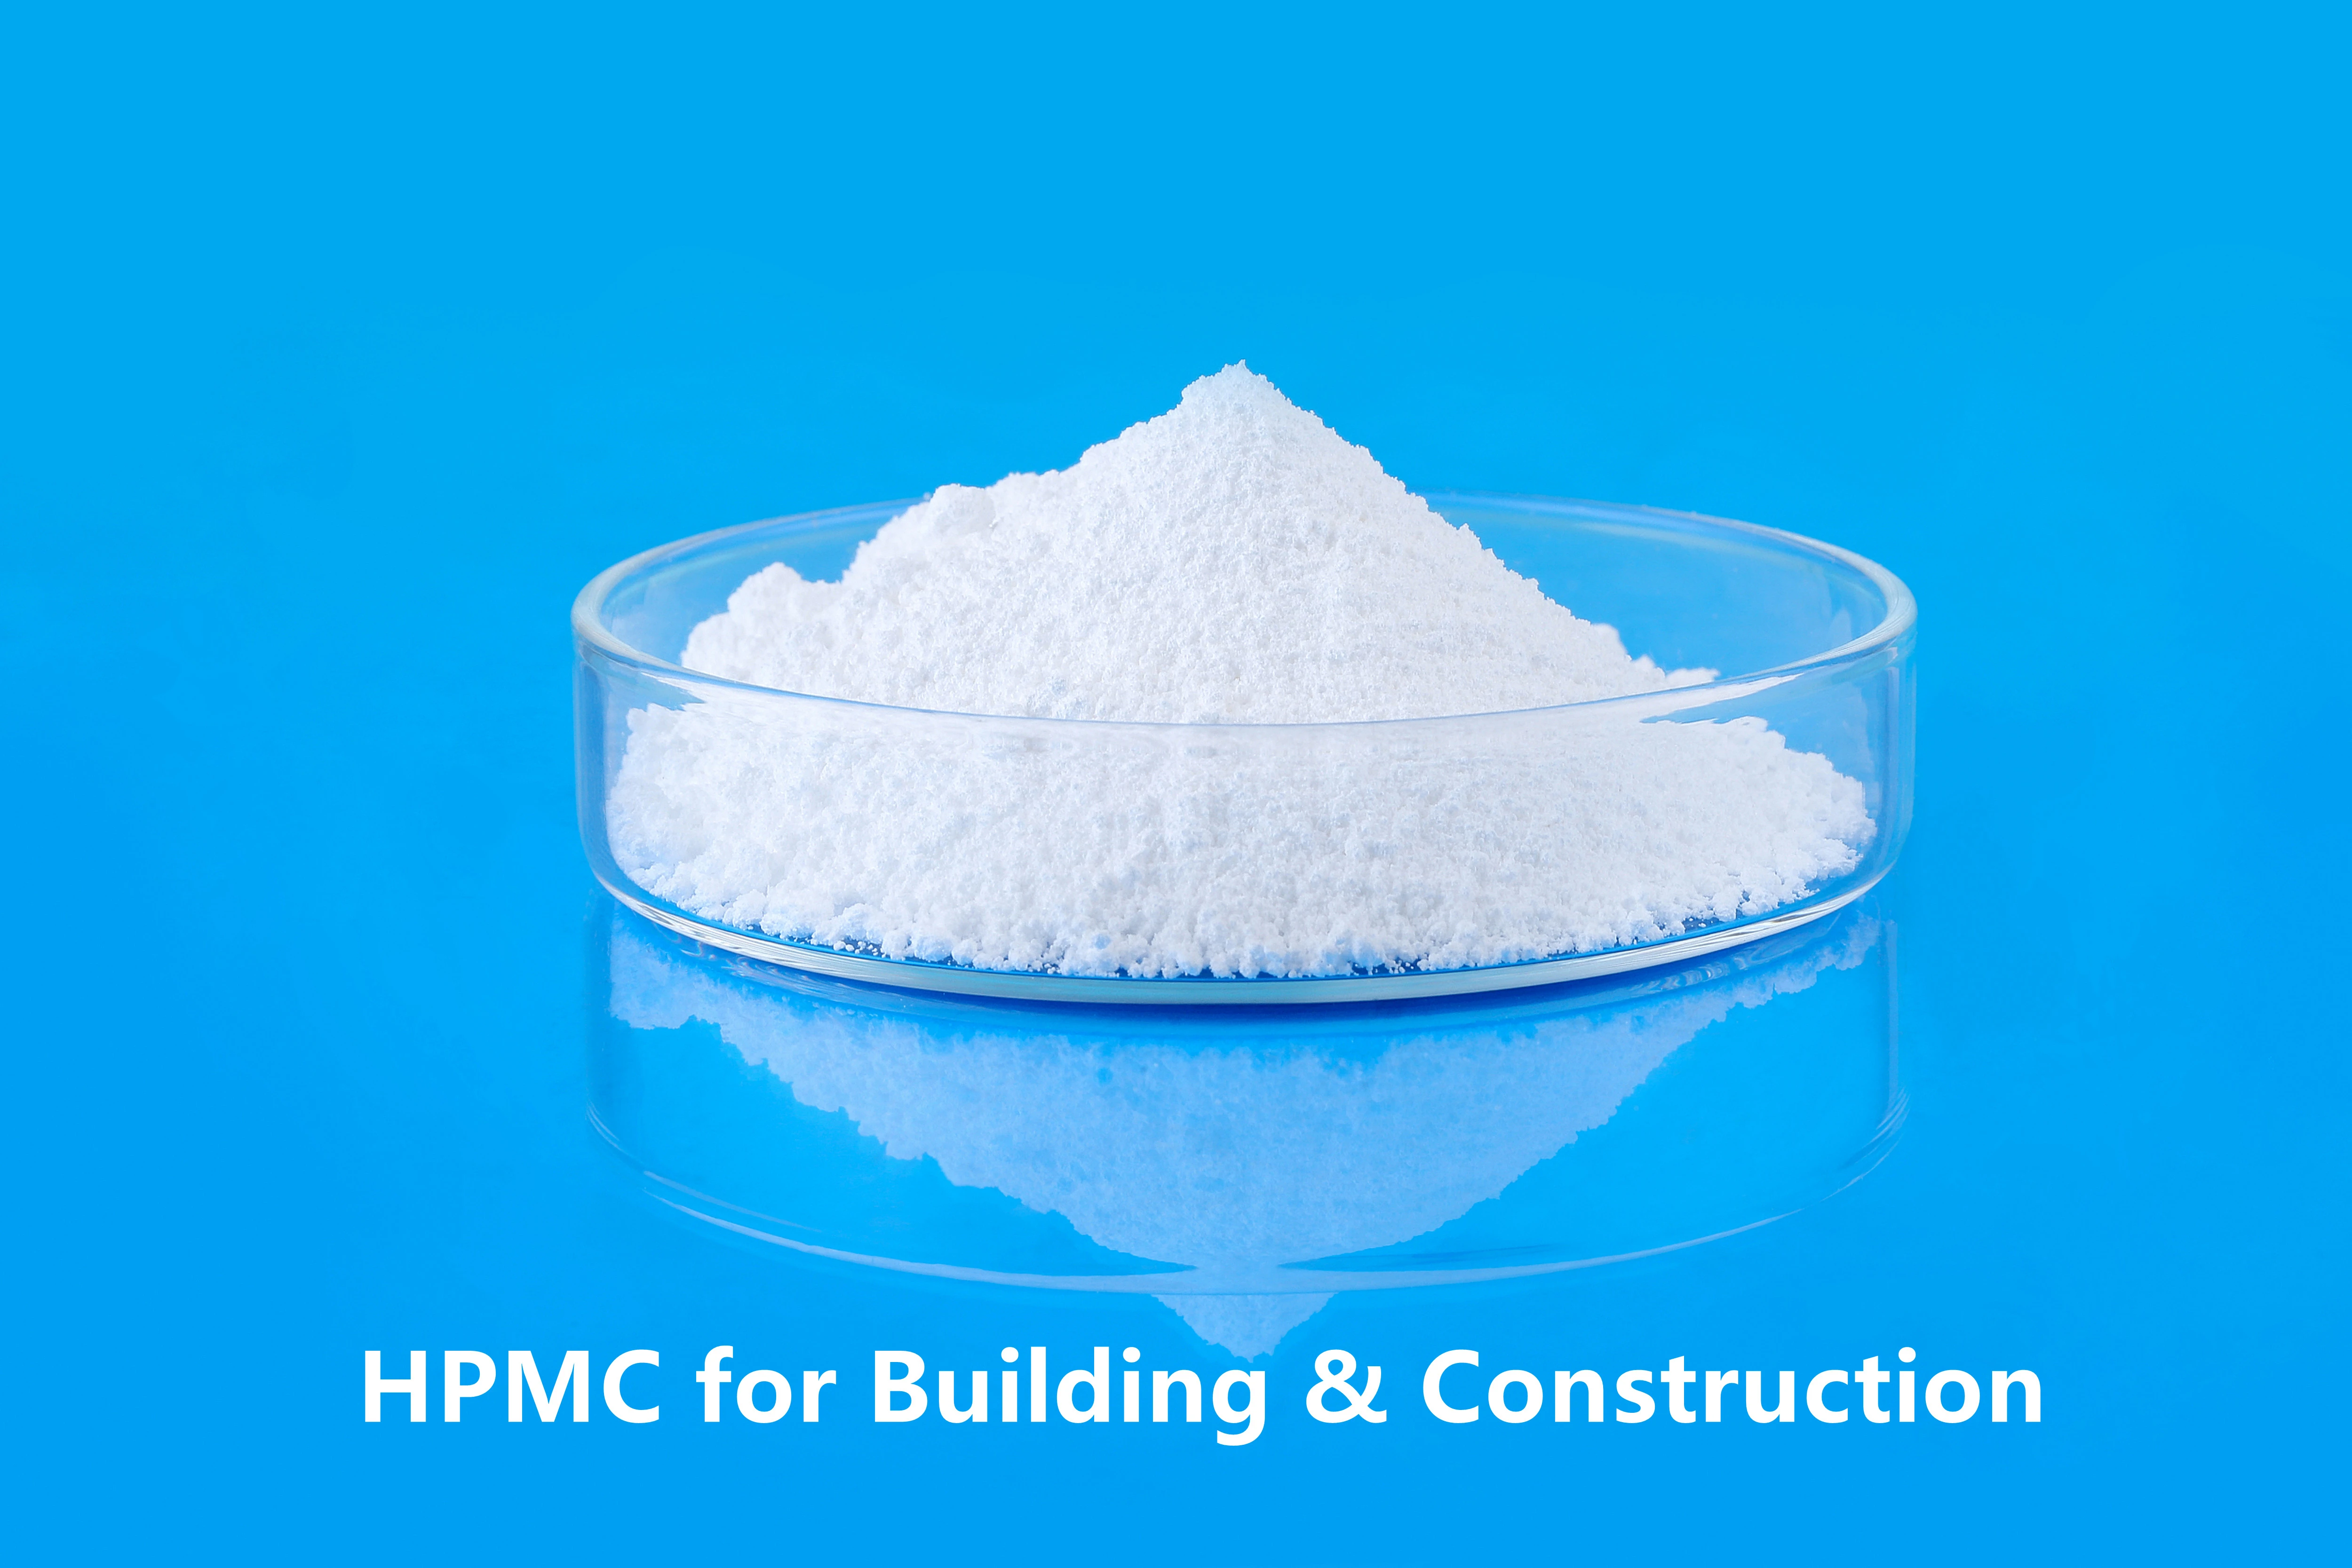 HPMC for Building & Construction